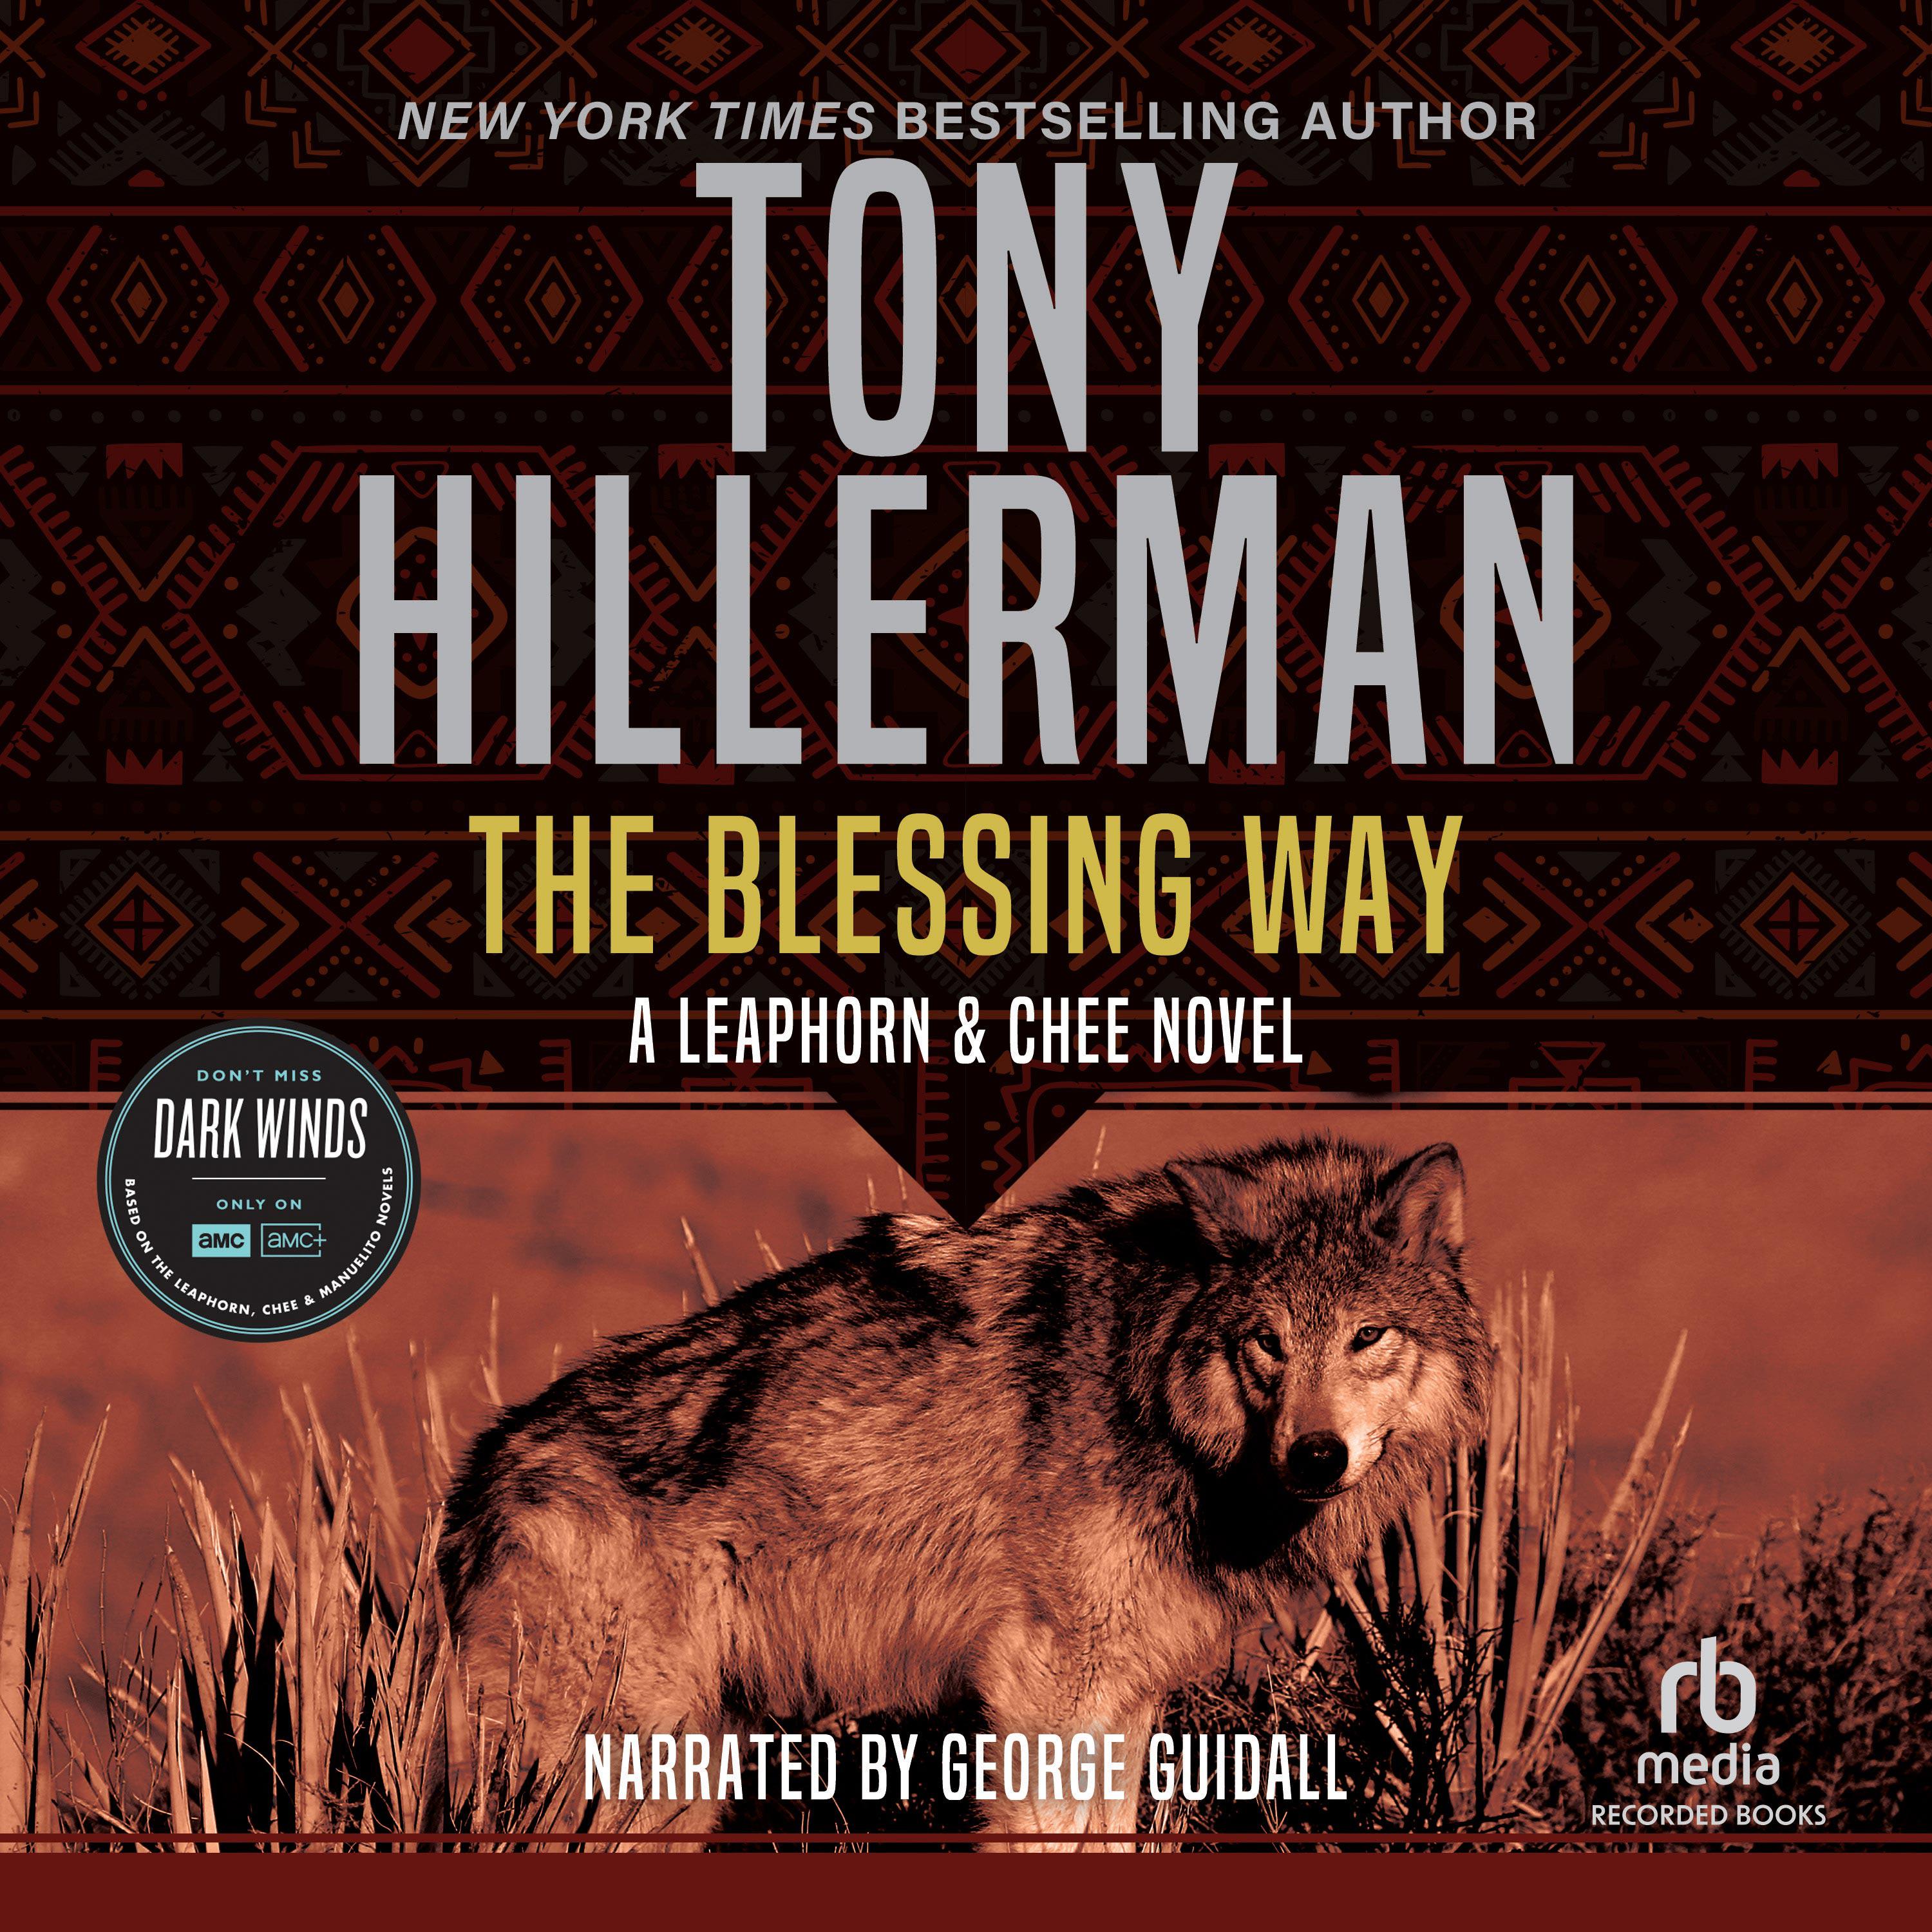 the blessing way hillerman